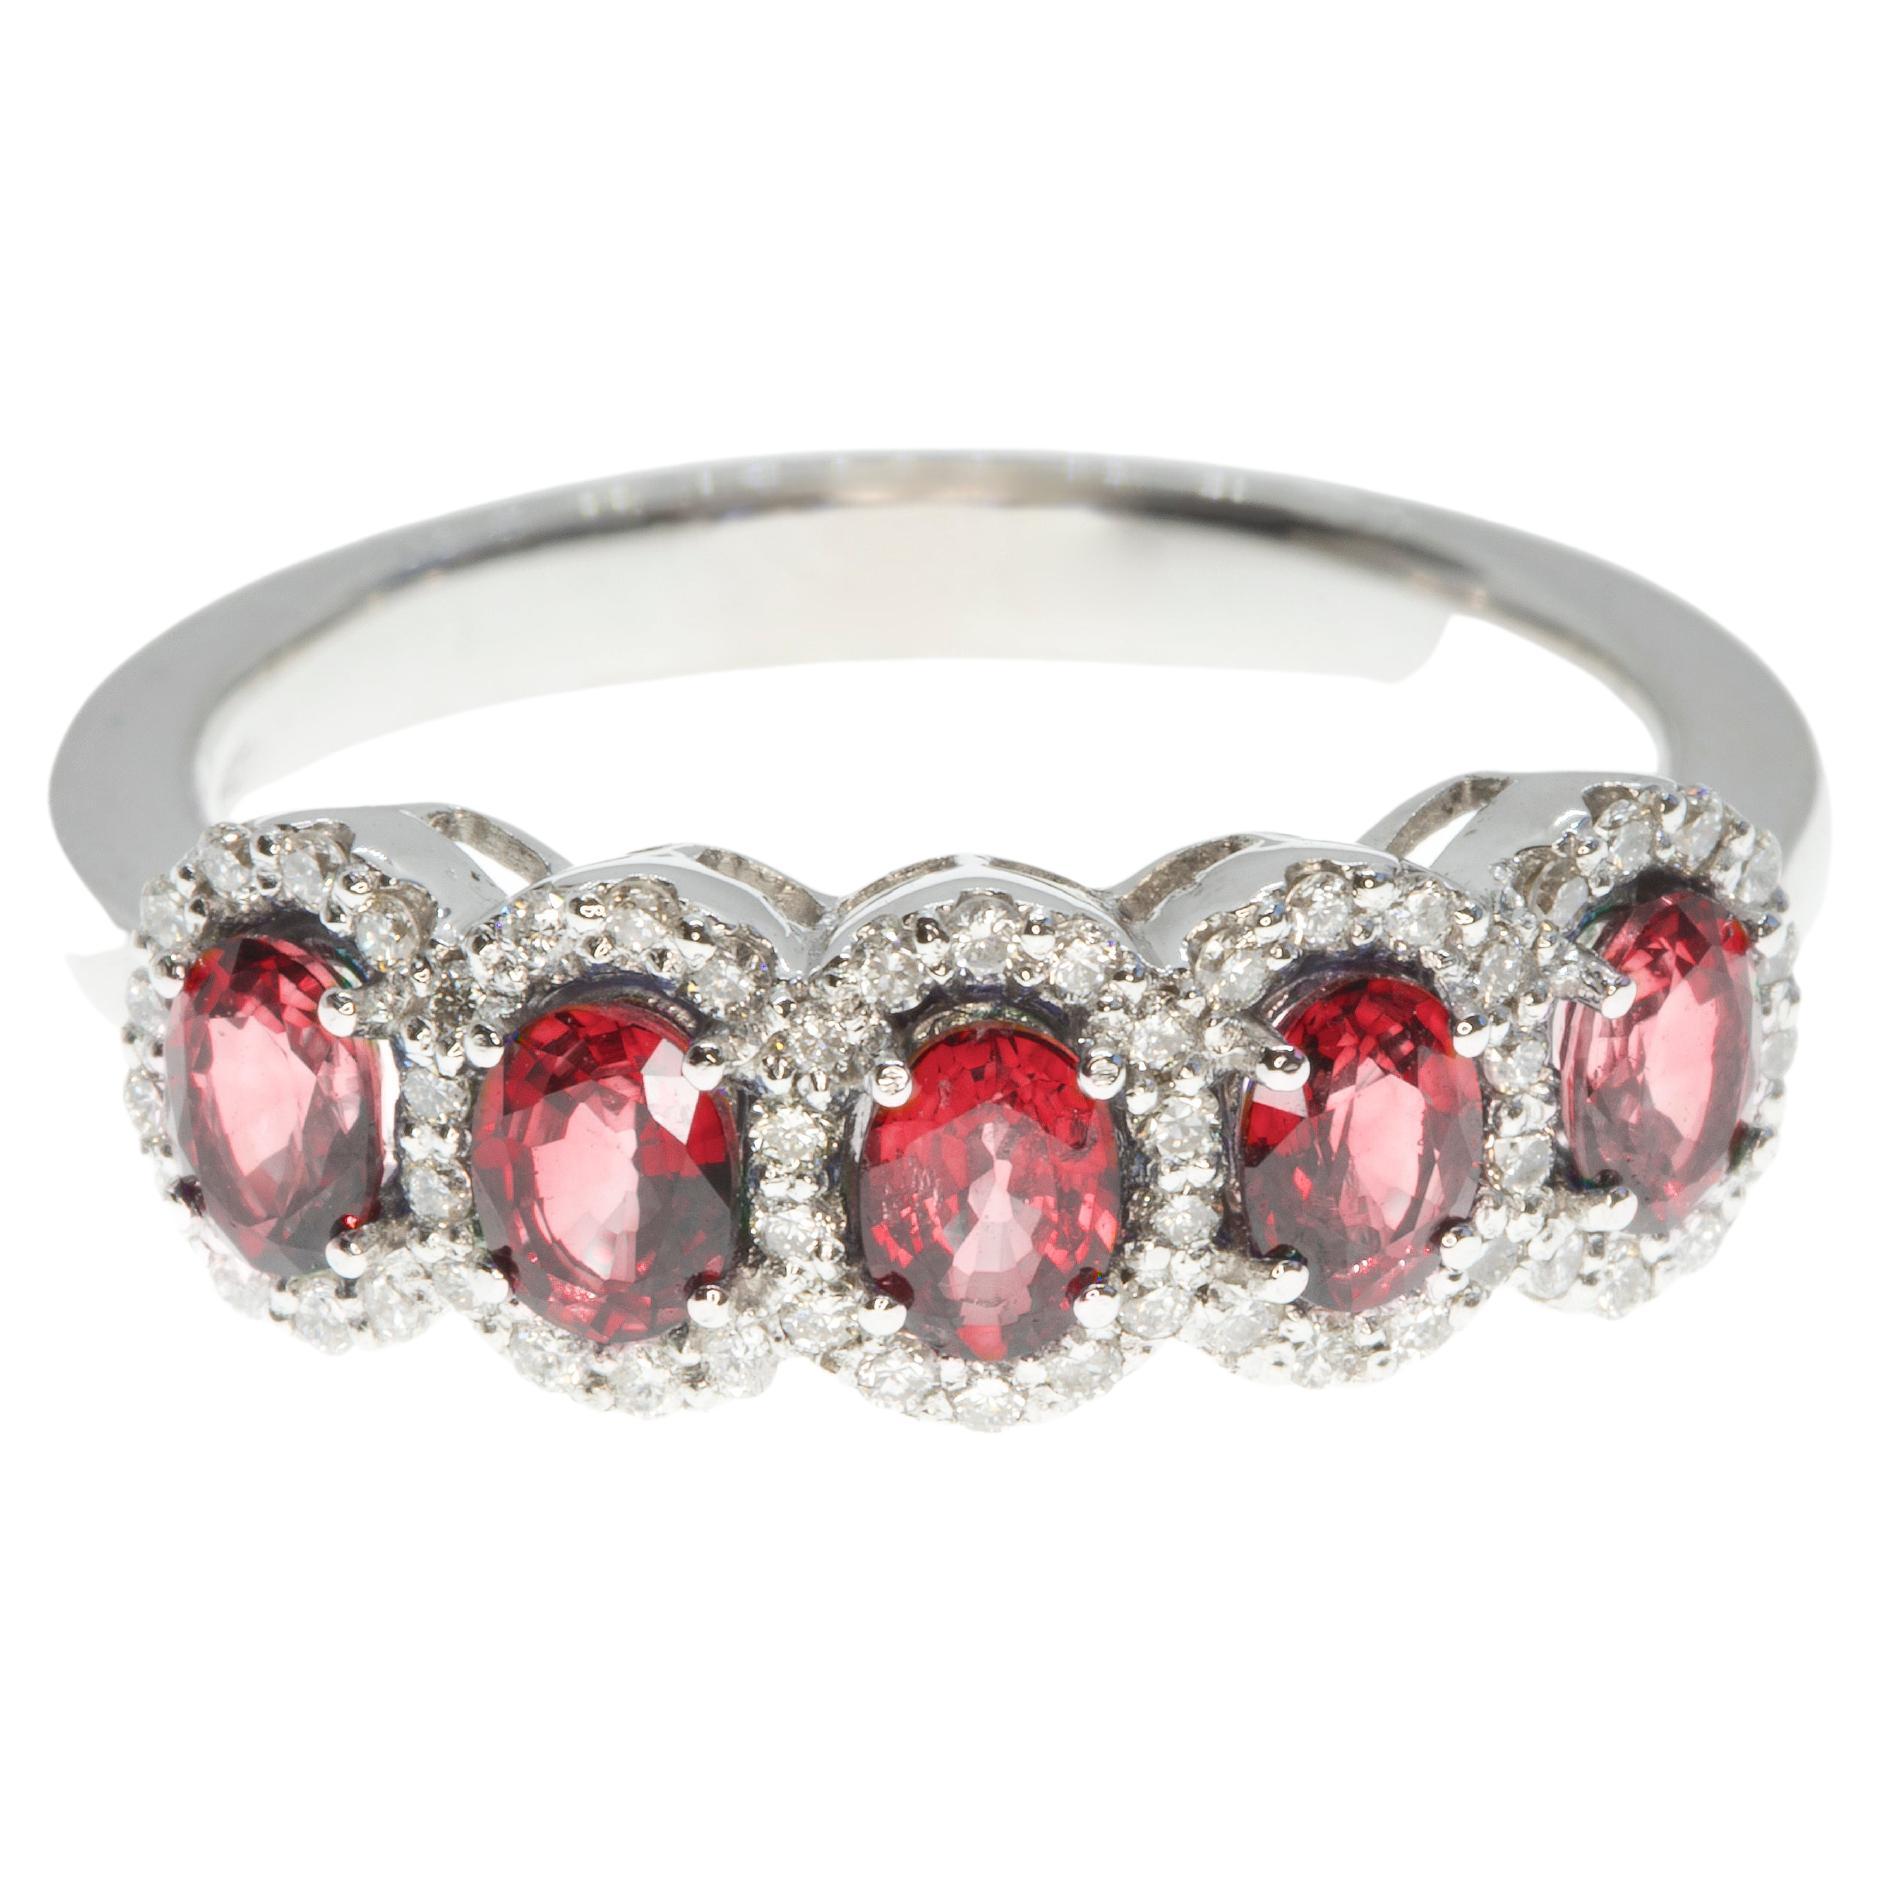 21st Century 18 Karat White Gold Diamond and Ruby Cocktail or Anniversary Ring